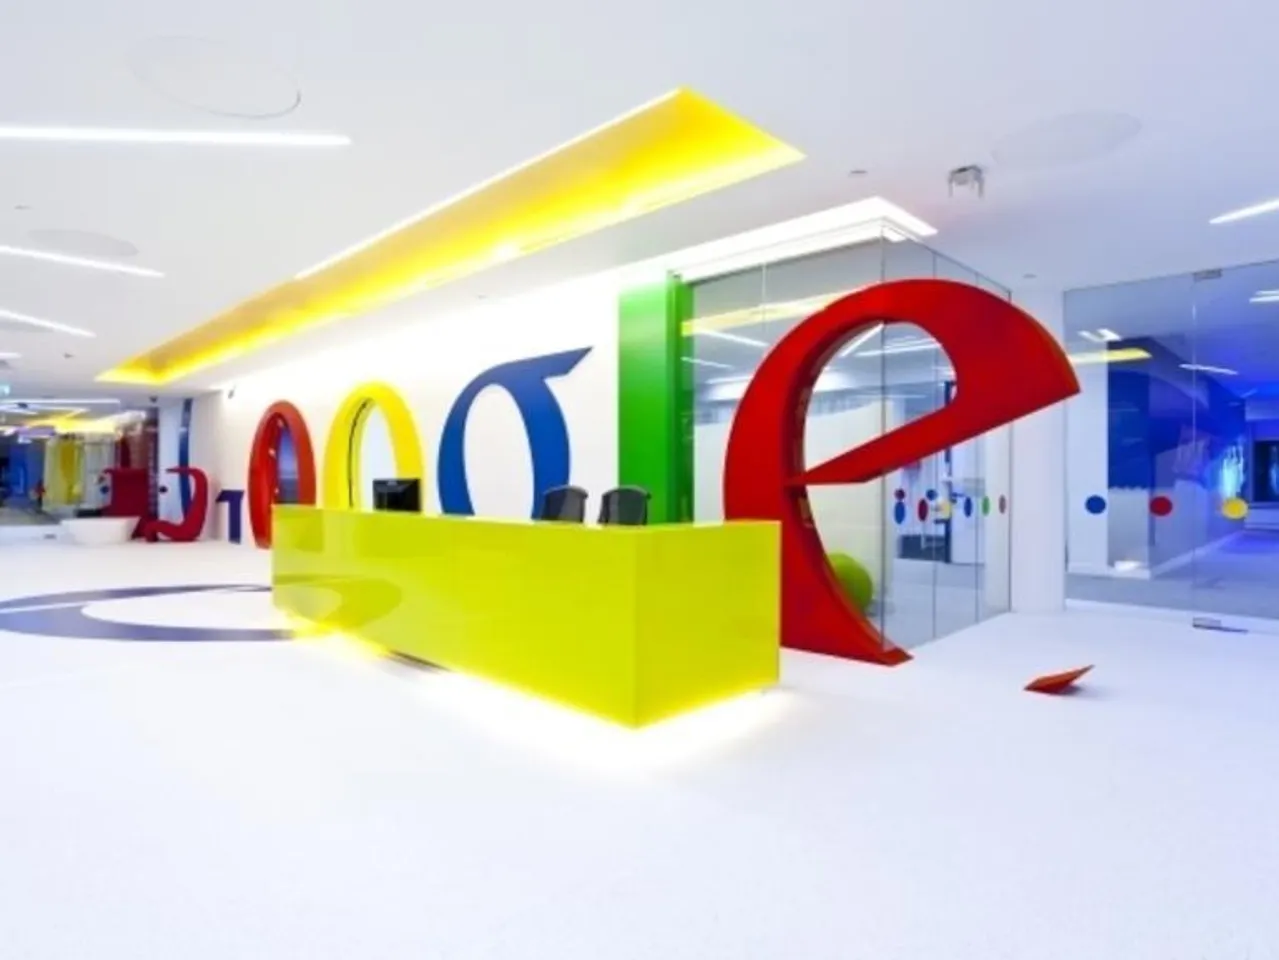 Google Partners With Coursera for Skill Development Initiative for IT Support Talent